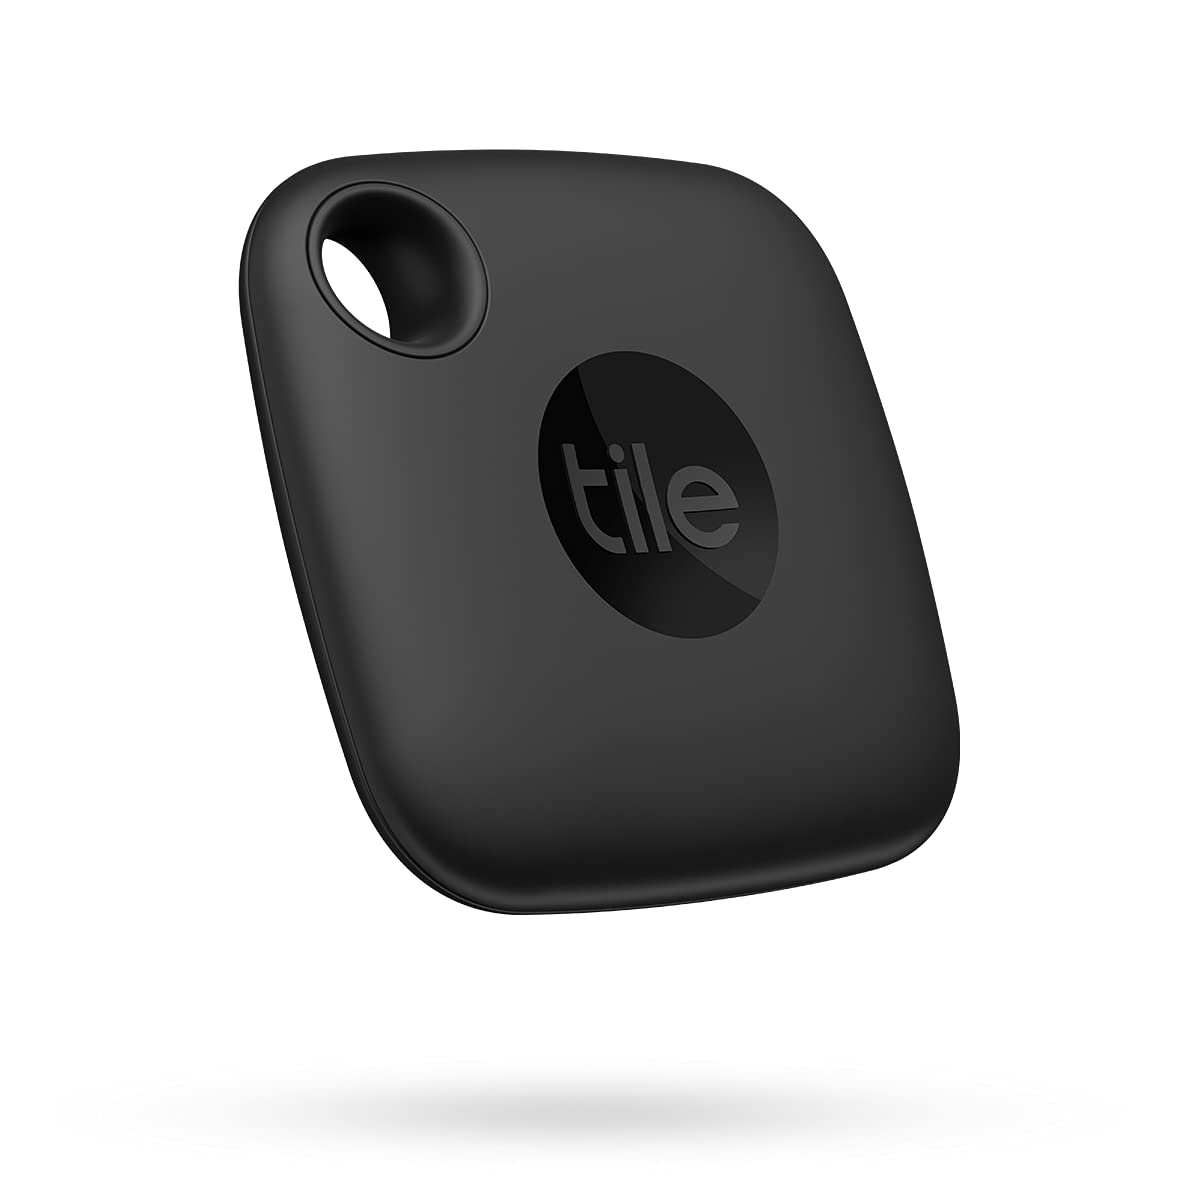 Tile Mate 1-Pack. Black. Bluetooth Tracker, Bags and More; Up to 250 ft. Range. Water-Resistant. Phone Finder. iOS and Android Compatible. $18